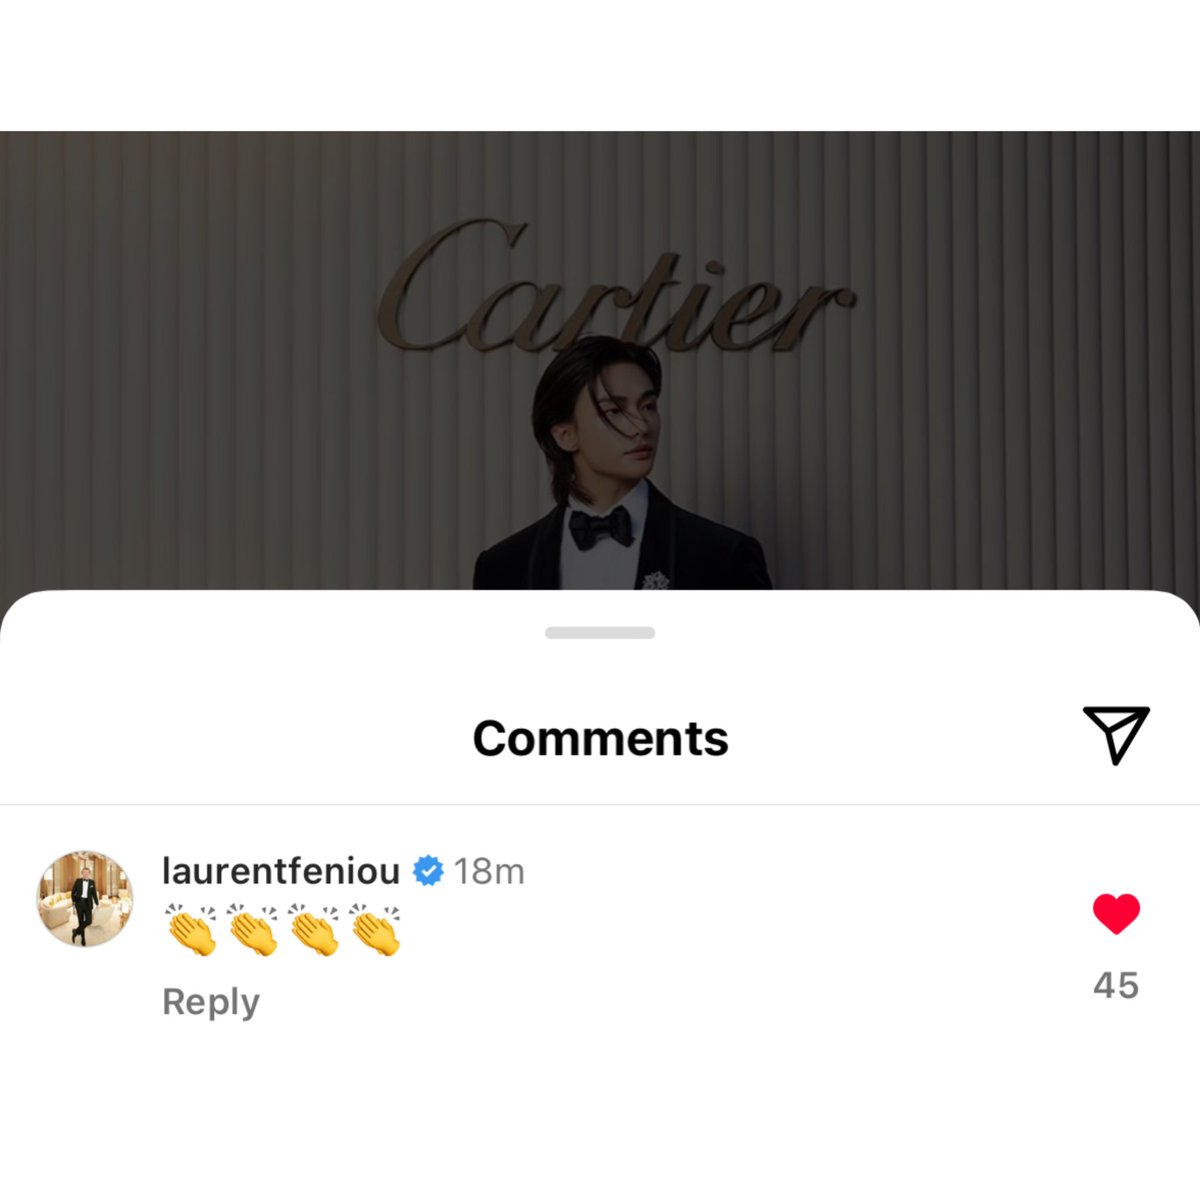 The managing director of Cartier liked and commented under #Hyunjin’s recent instagram post! He also followed him and liked more of his posts 👀🔥 #HYUNJINxCARTIER